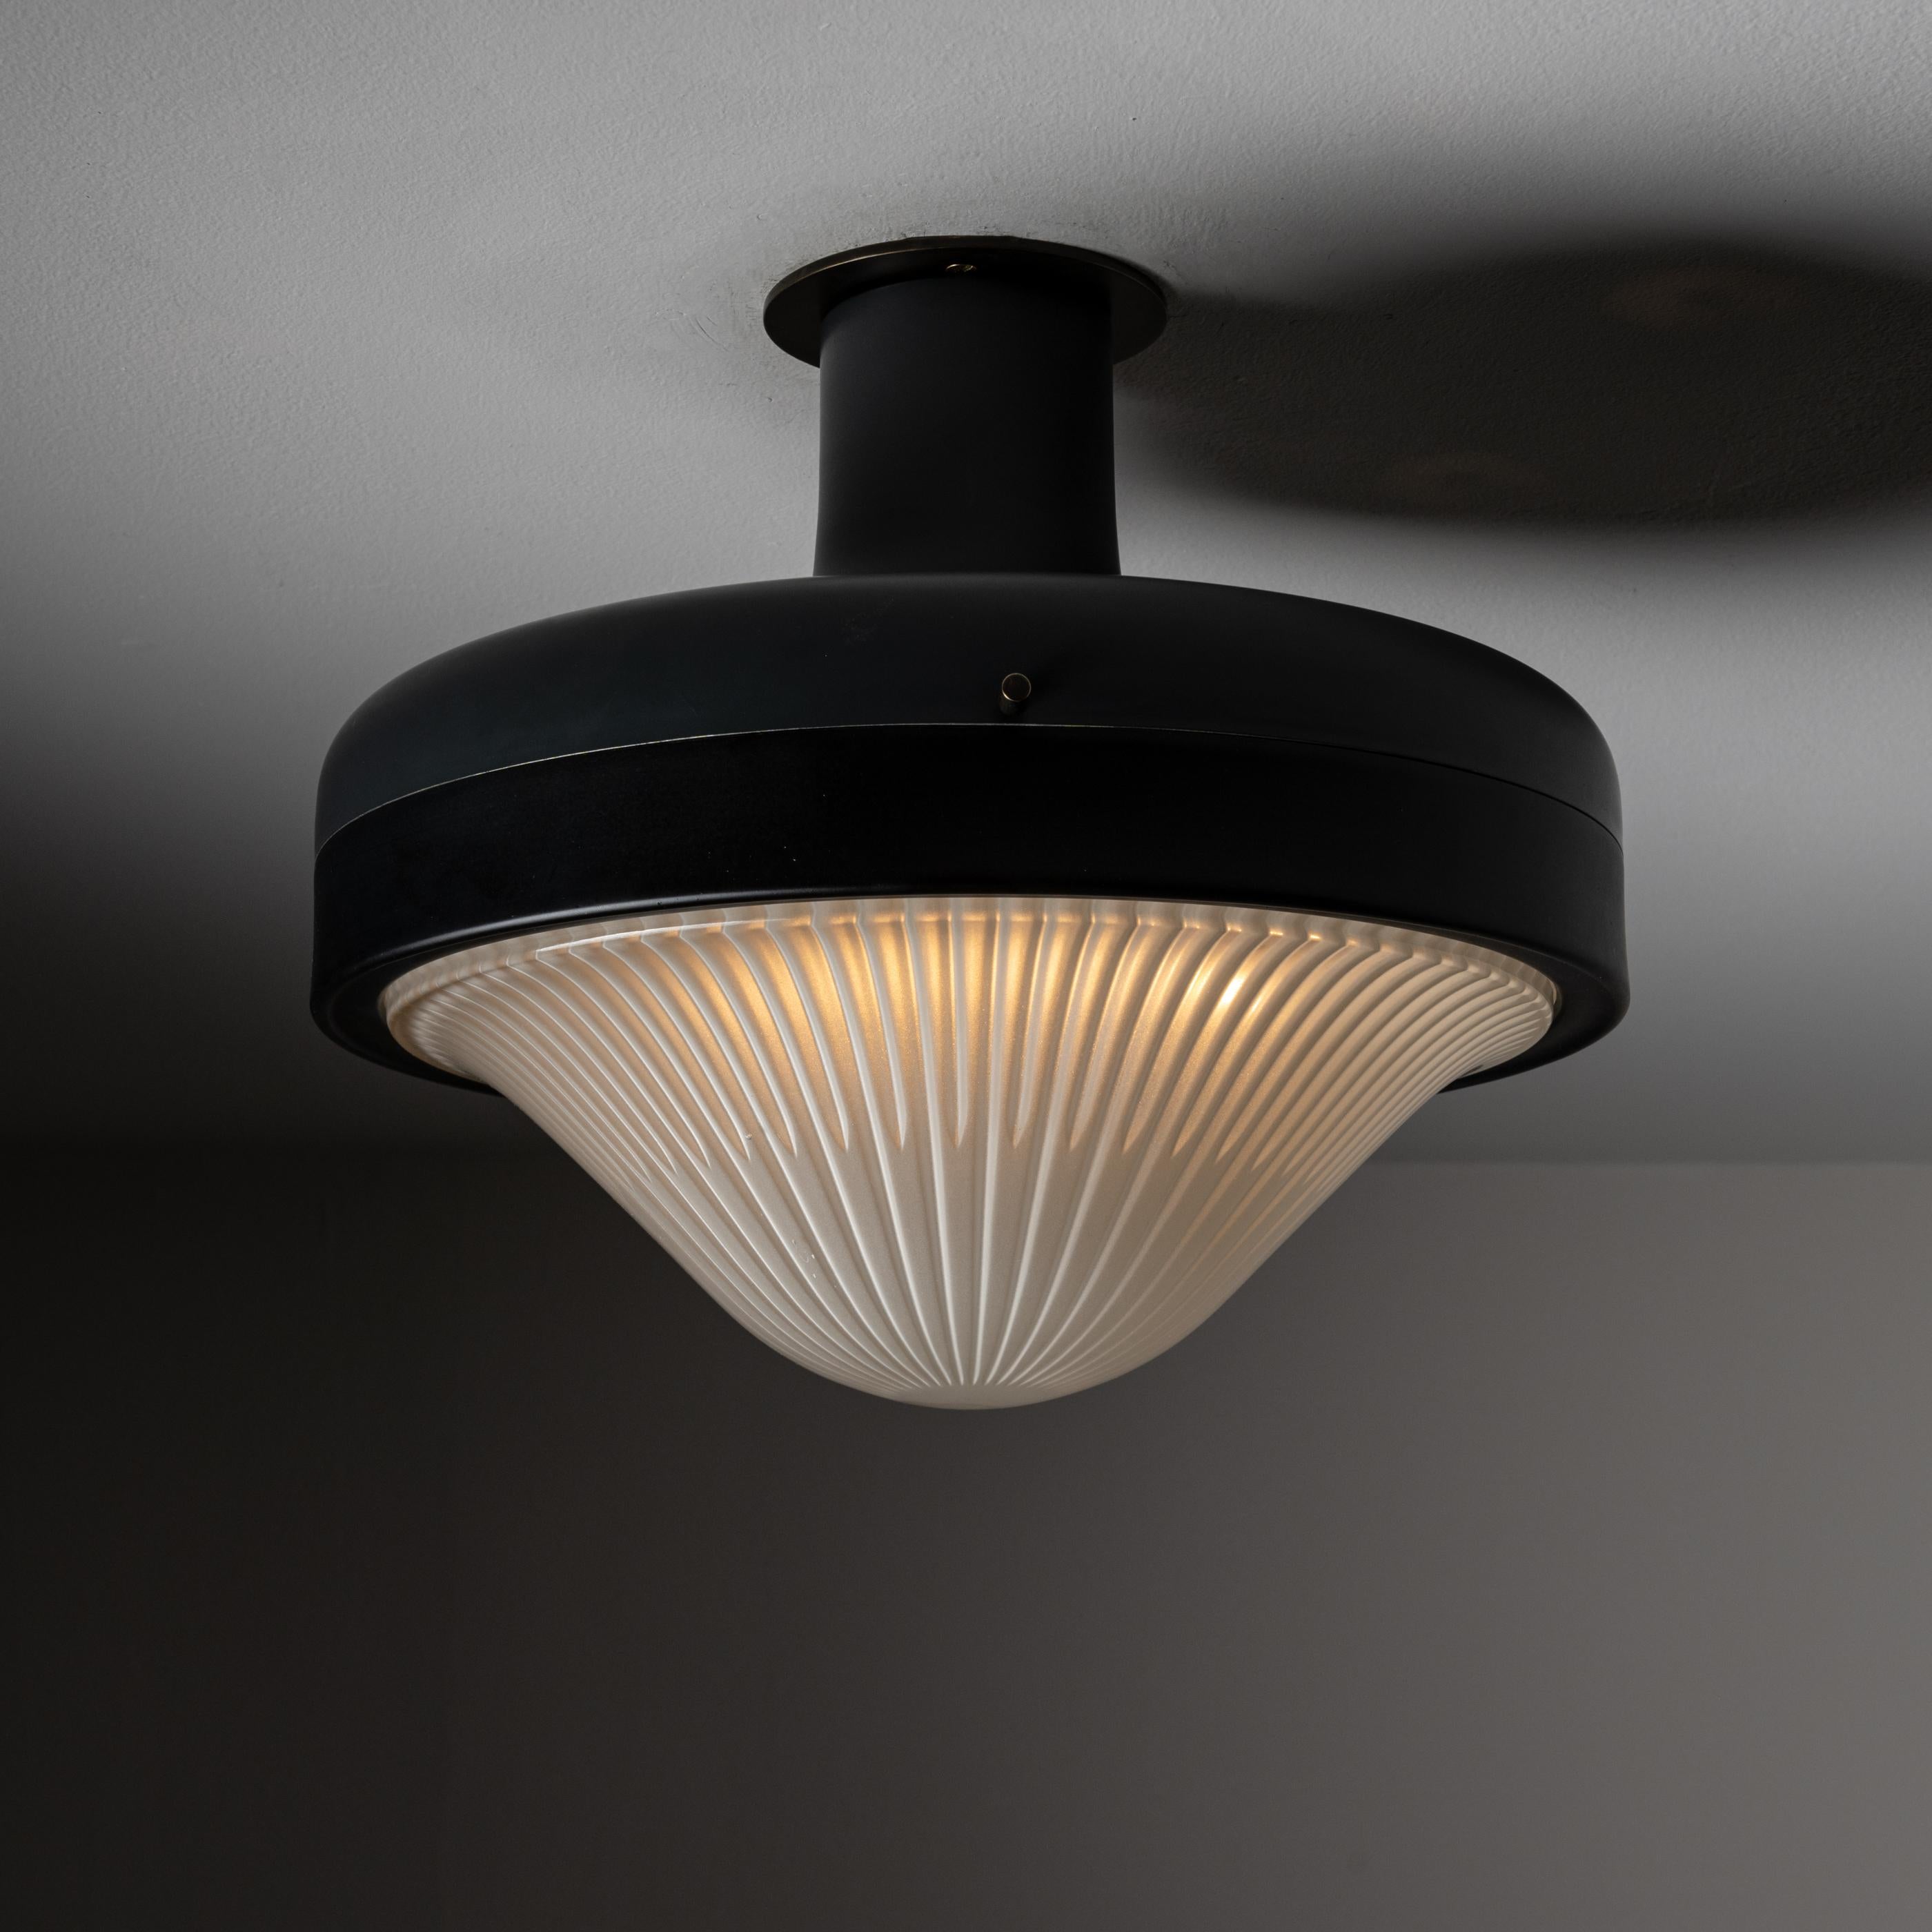 Flushmount by Greco. Circular matte finish ceiling fixture with beveled dew drop glass diffuser. Manufactured and designed in Italy circa 1950. We recommend using one E27 40W maximum bulb. Wired for US. Bulbs included as a one time courtesy.